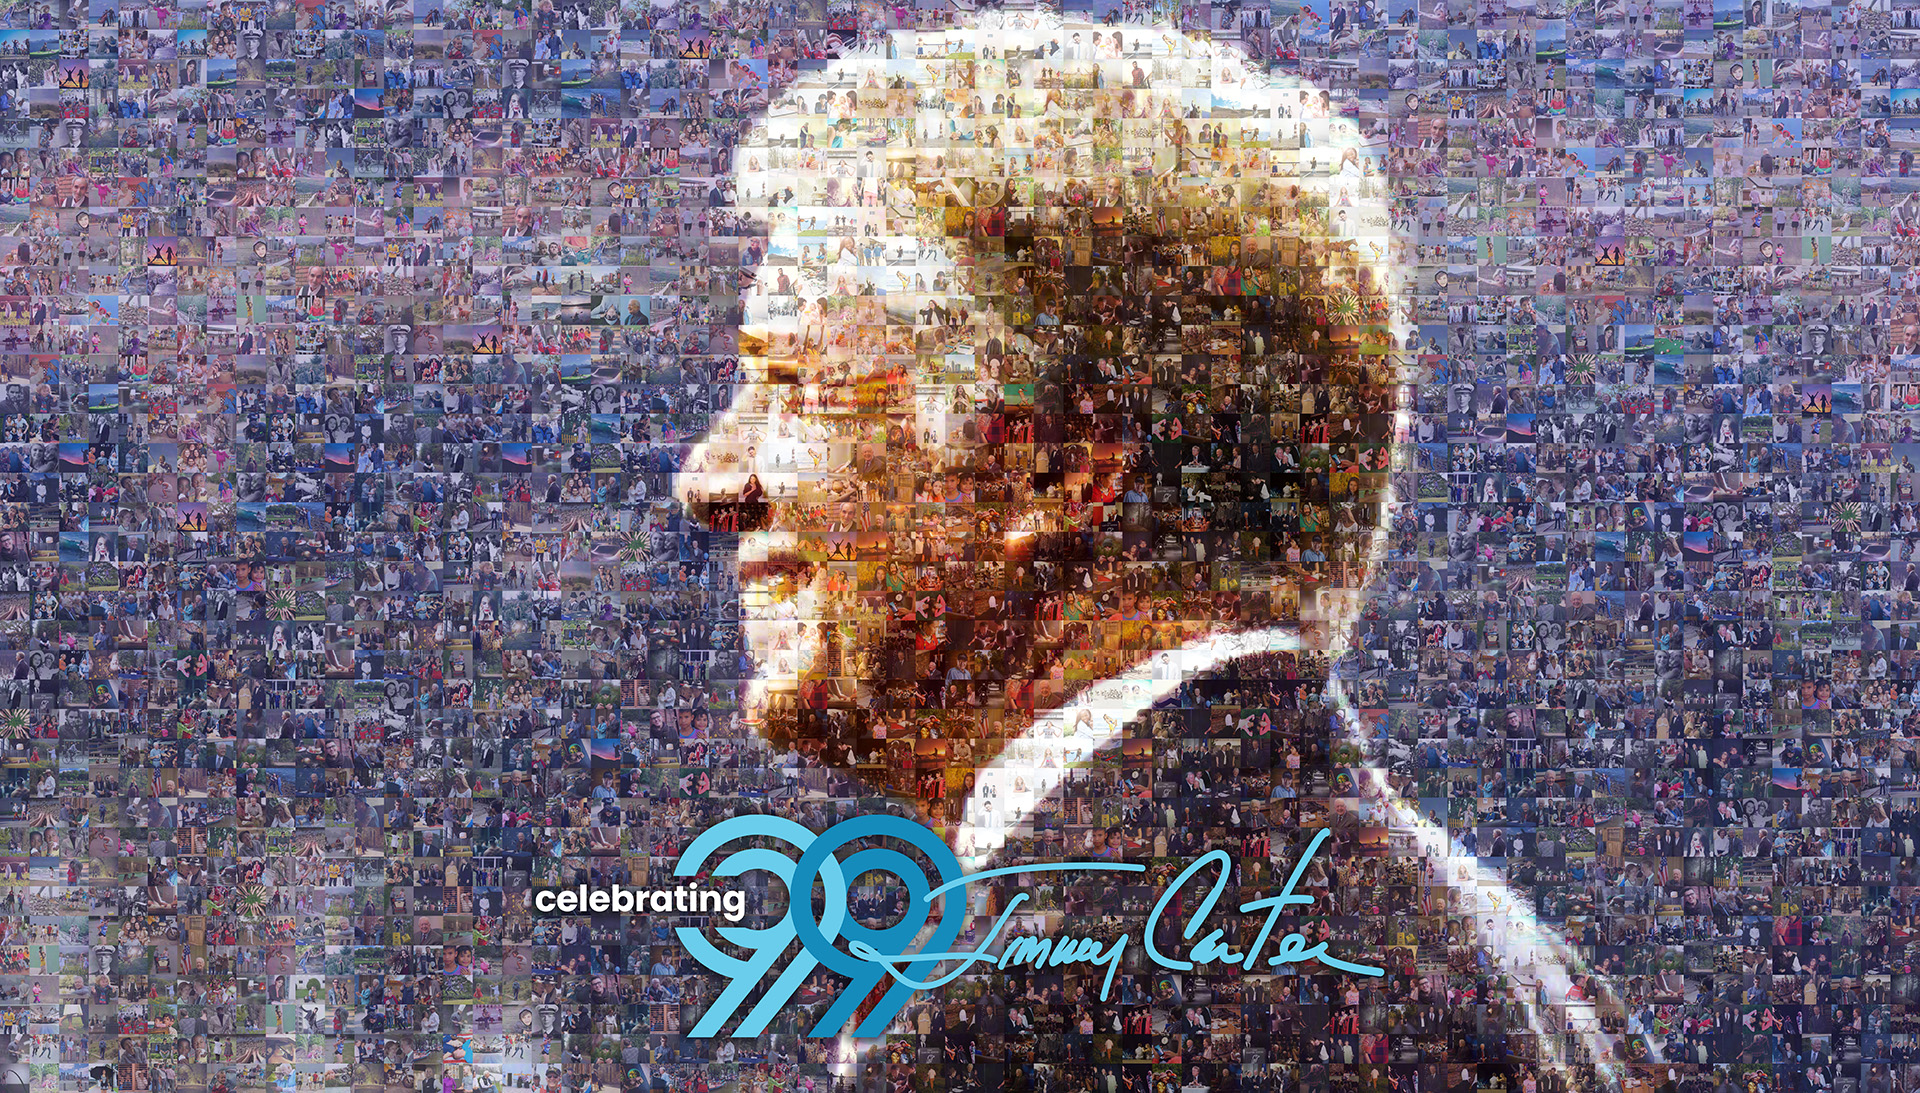 A photo mosaic of President Jimmy Carter celebrating his 99th birthday